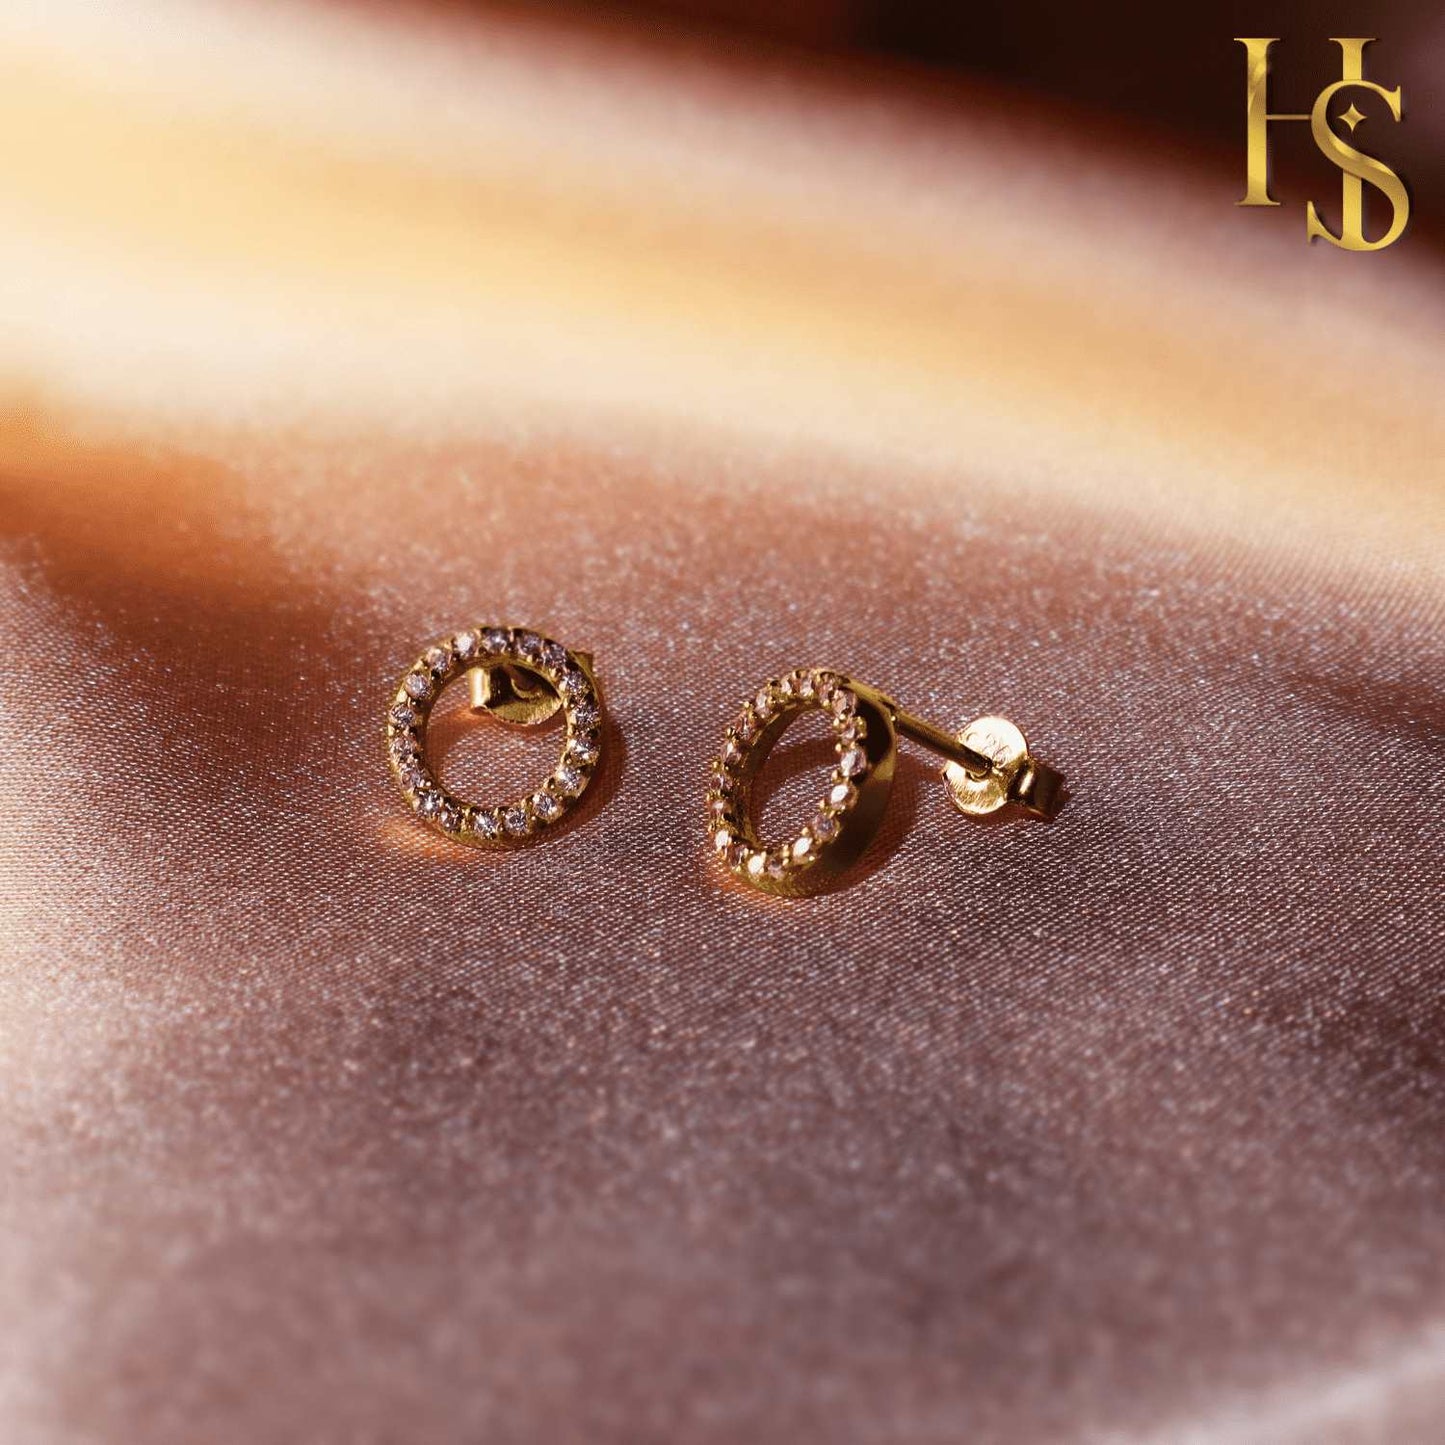 Circle of Life Earrings - 92.5 Silver in Gold - Unity, Wholeness and Completeness -18K Gold Finish